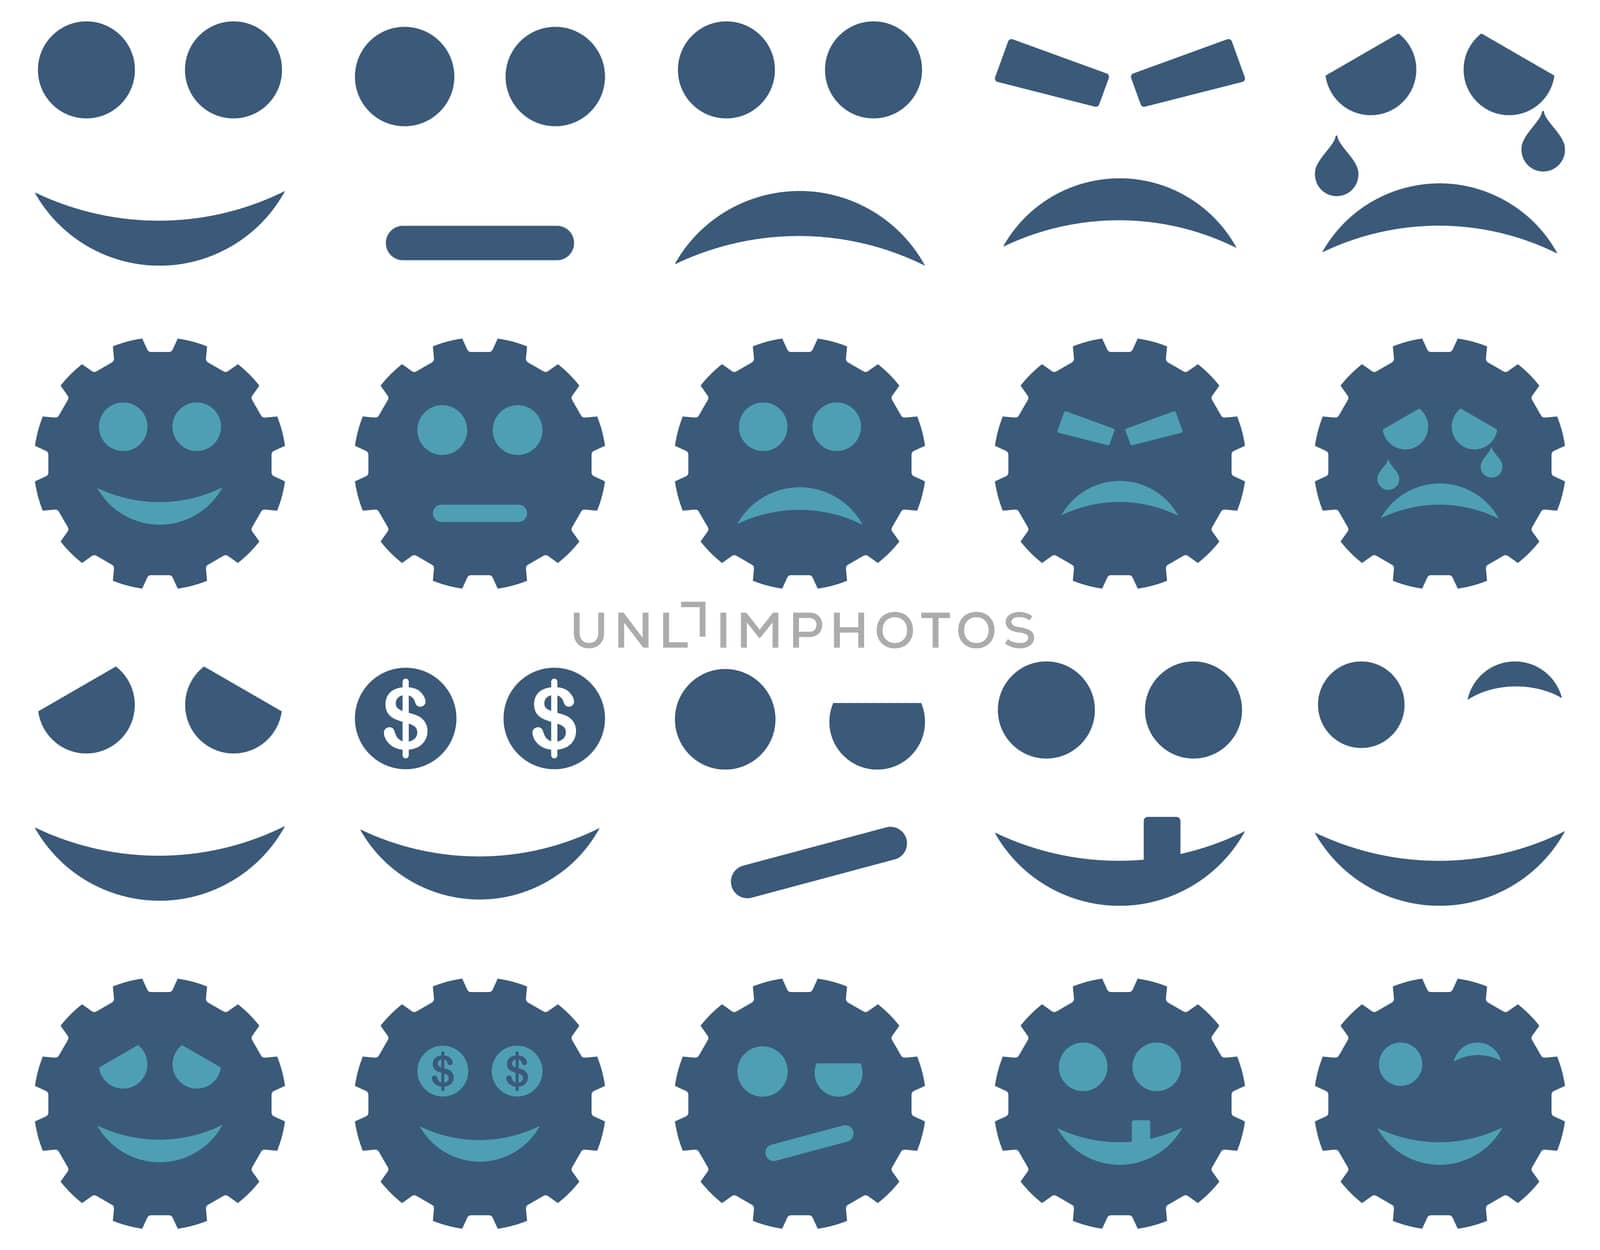 Tools, gears, smiles, emoticons icons. Glyph set style is bicolor flat images, cyan and blue symbols, isolated on a white background.